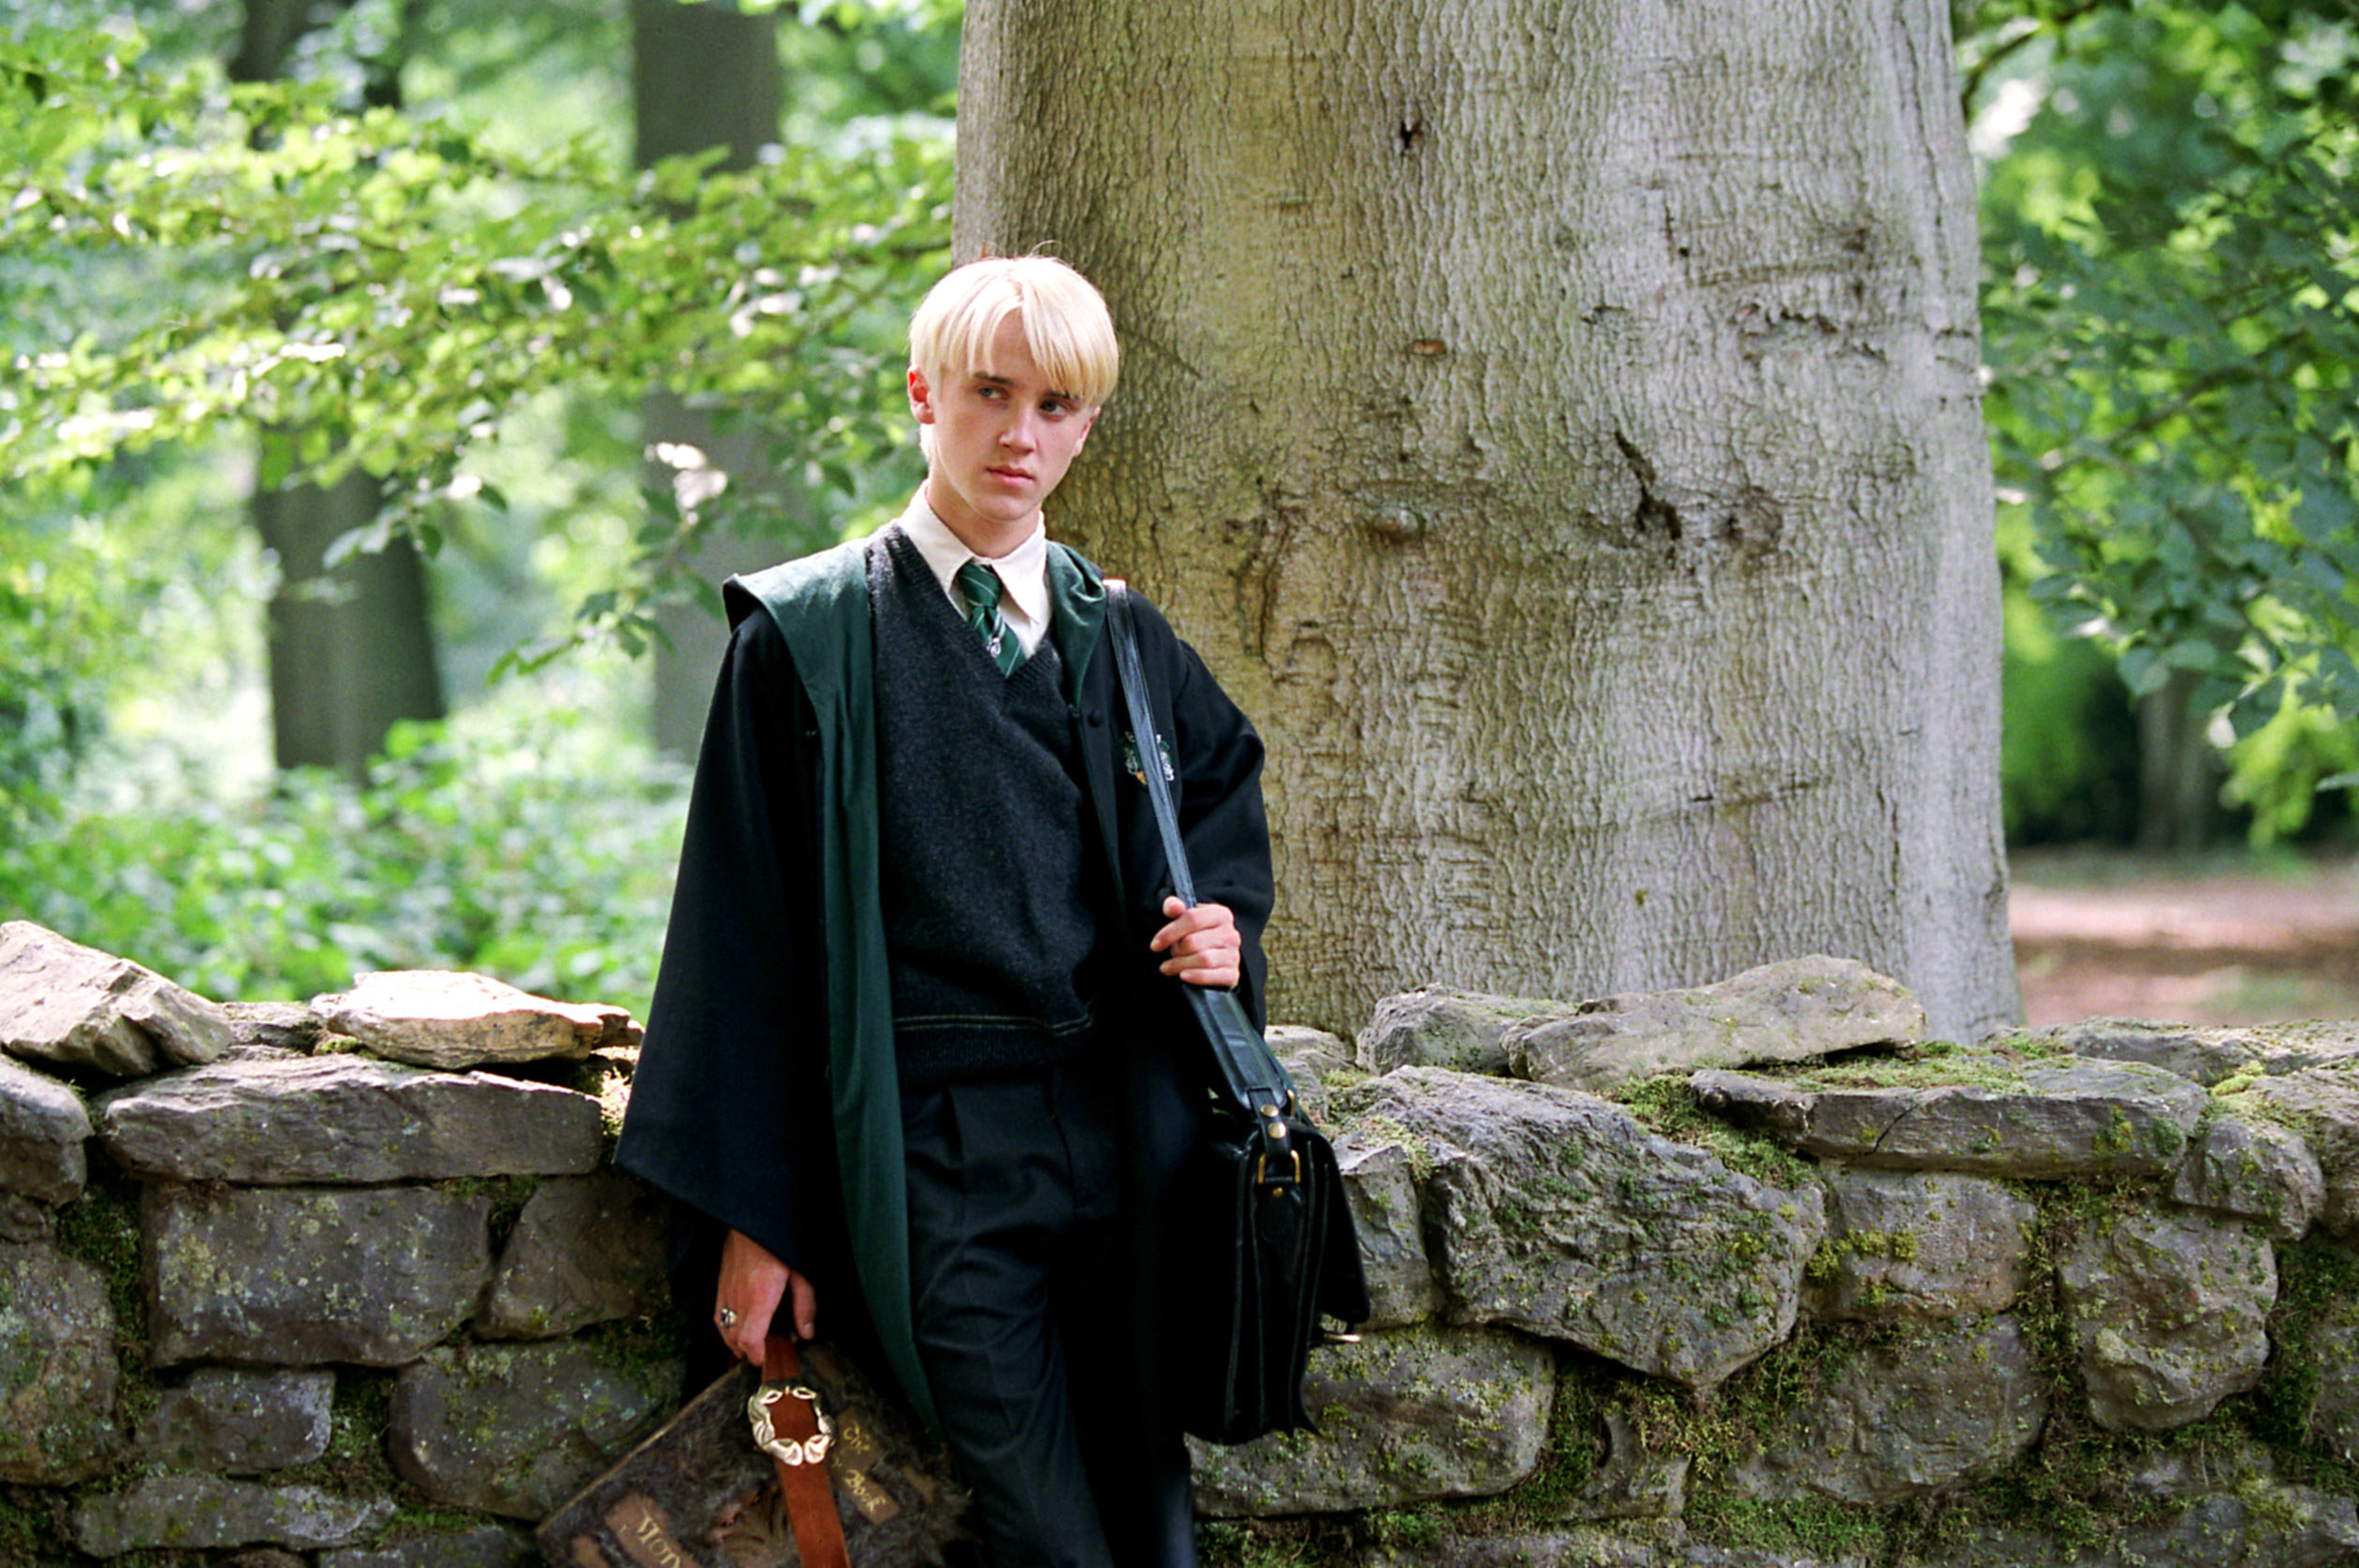 Felton as Malfoy standing outside with his book bag